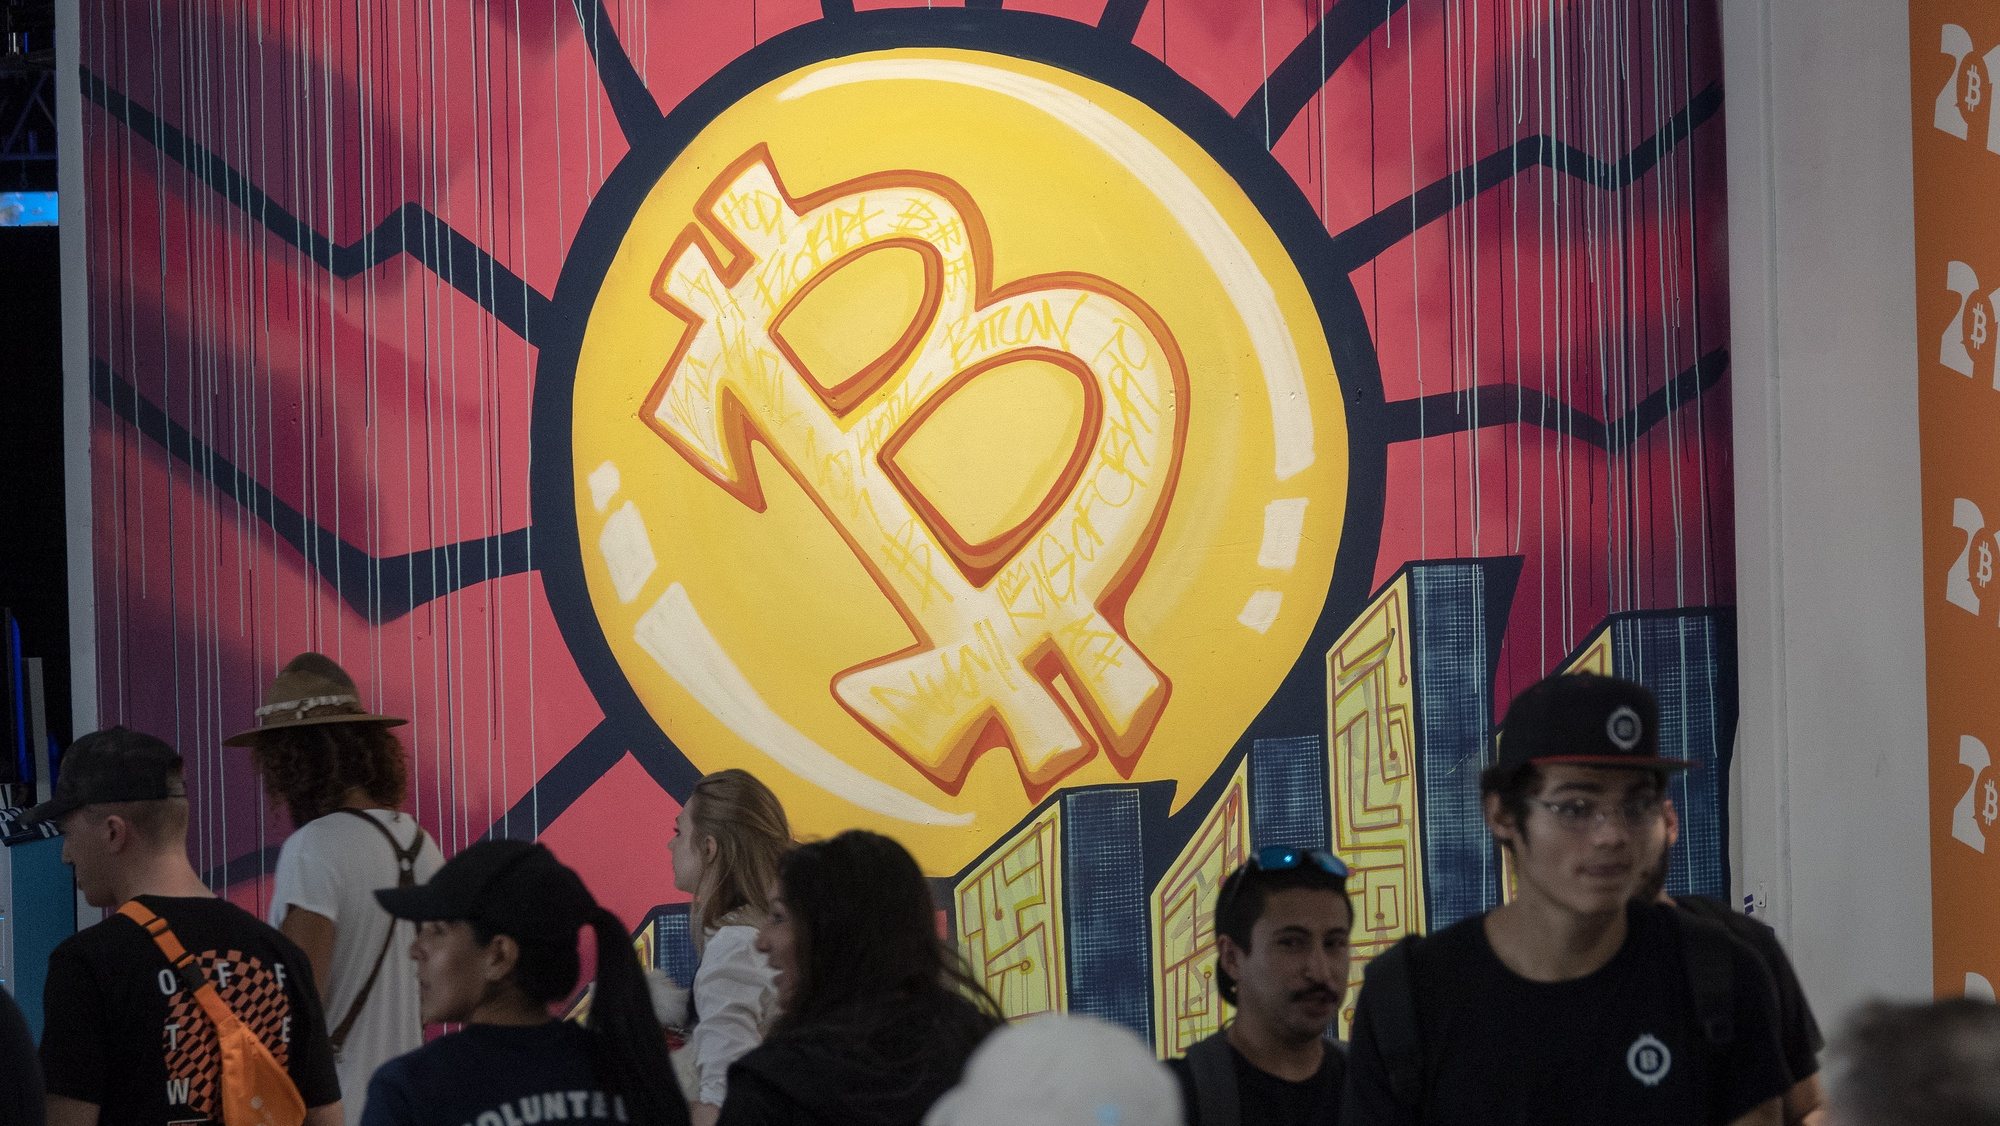 epa09248237 People attend the Bitcoin 2021 Convention, at the Mana Convention Center in Wynwood. Miami, Florida, USA, 04 June 2021. Bitcoin 2021 is the world’s largest-ever crypto-currency conference to be held 04 and 05 June 2021 with a sold-out crowd of 12,000 attendees and thousands more throughout Miami.  EPA/CRISTOBAL HERRERA-ULASHKEVICH